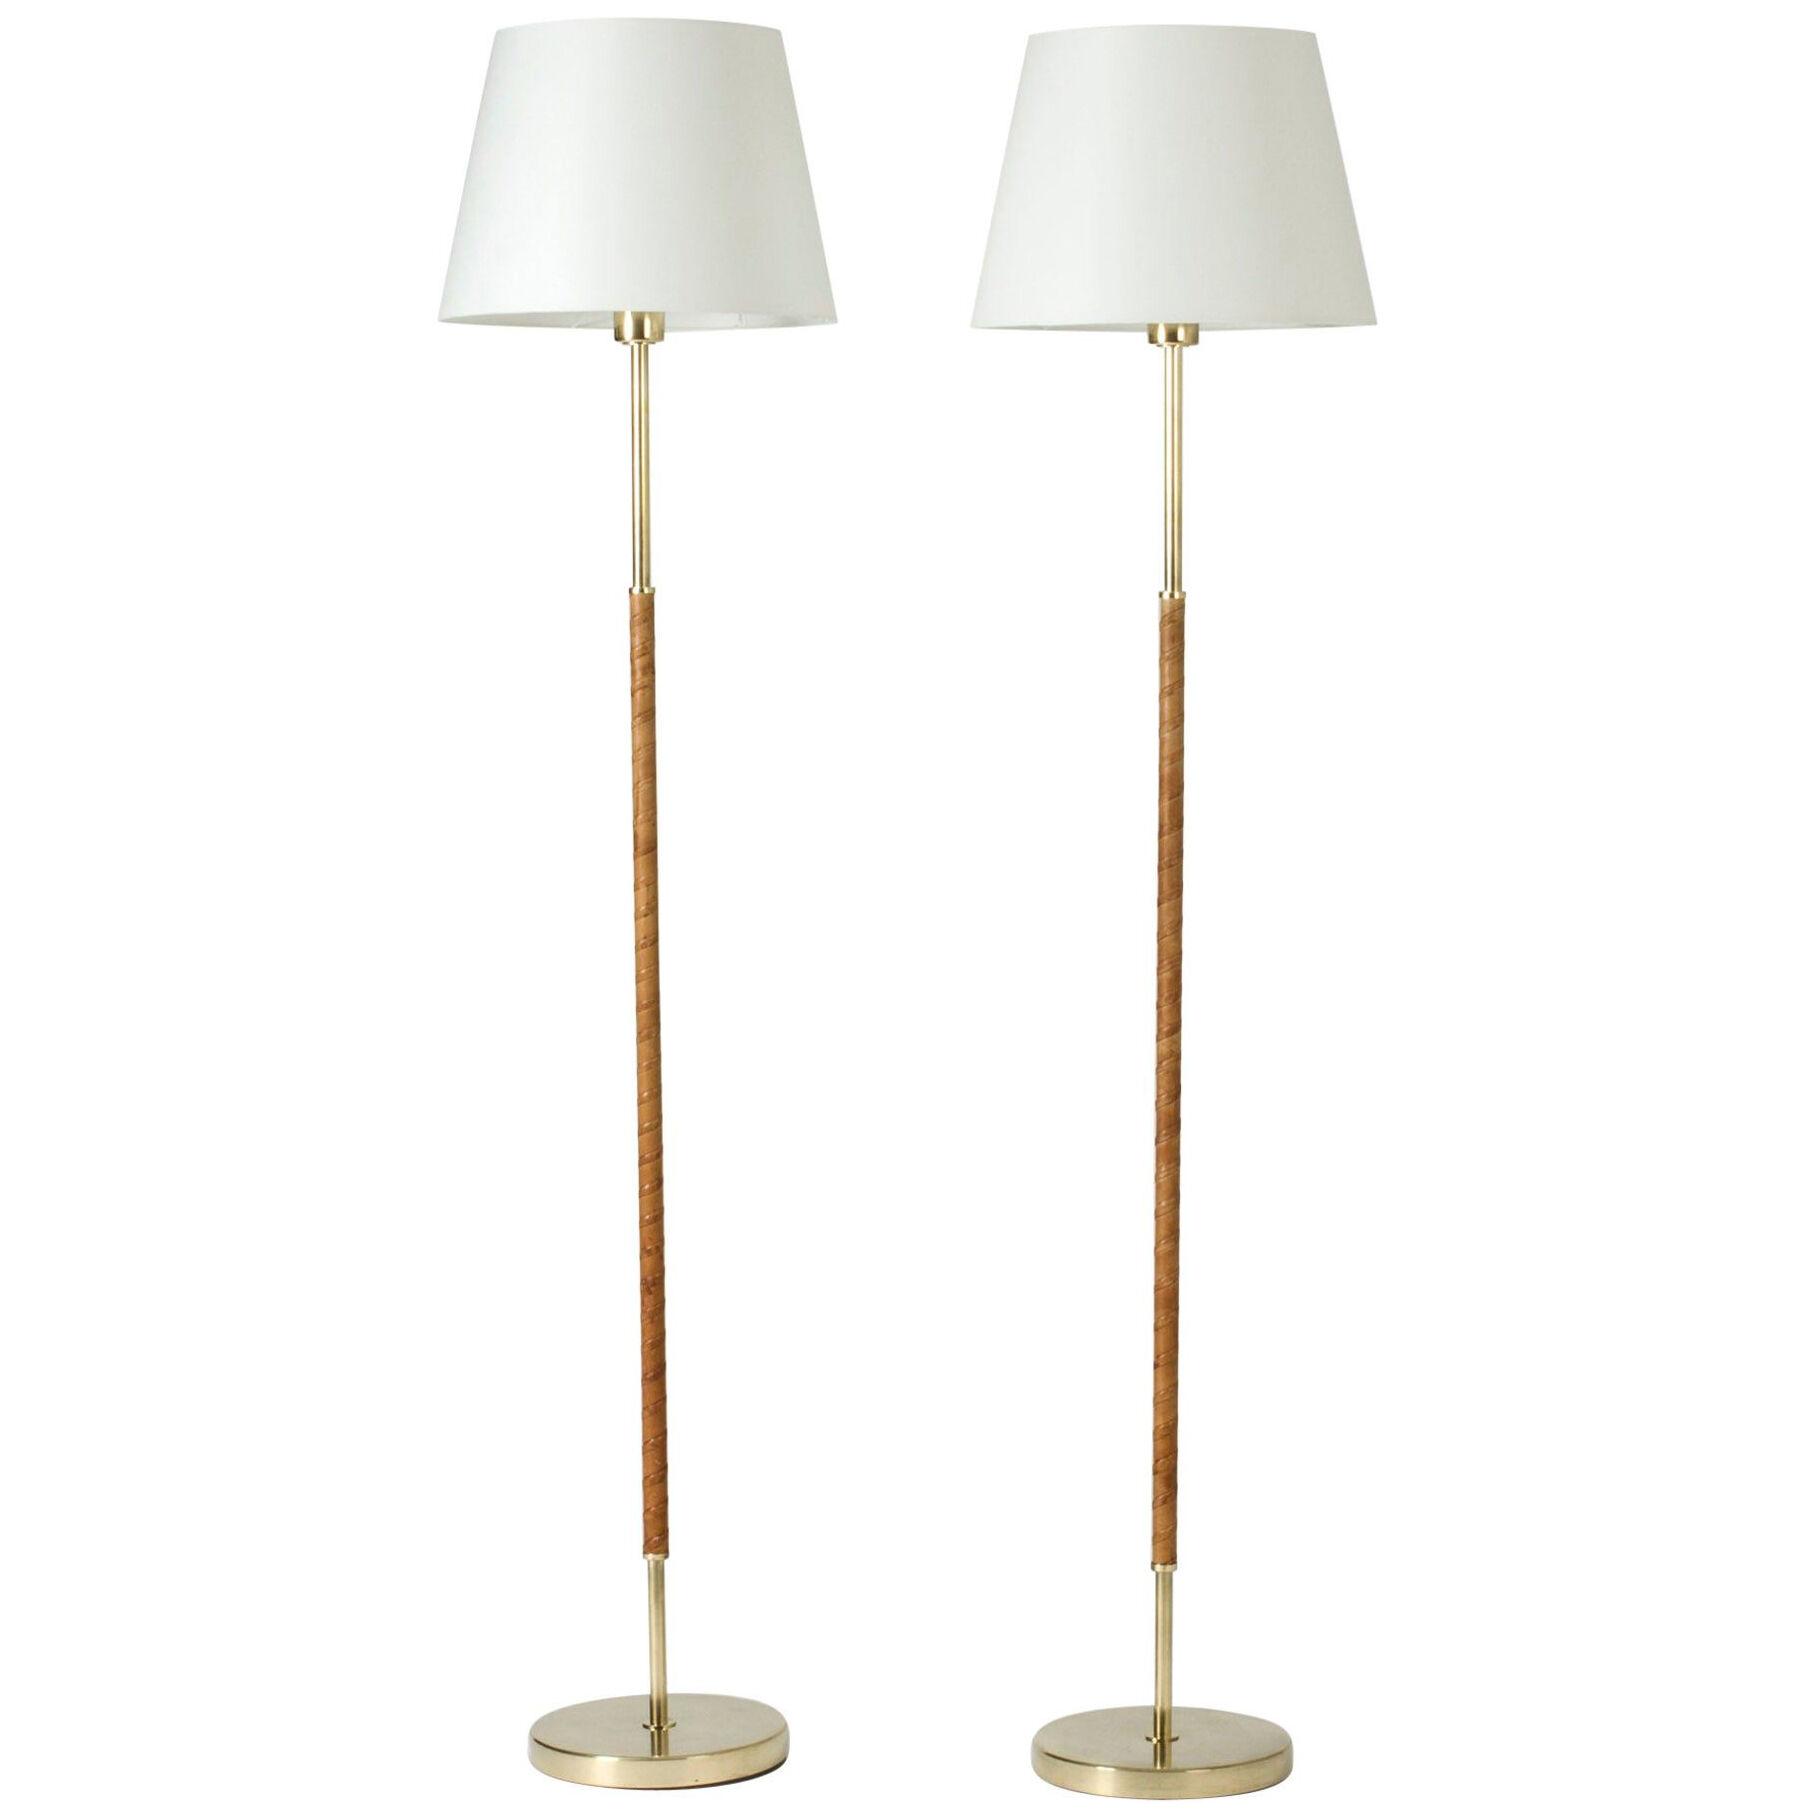 Pair of Brass and Leather Floor Lamps from Böhlmarks, Sweden, 1950s